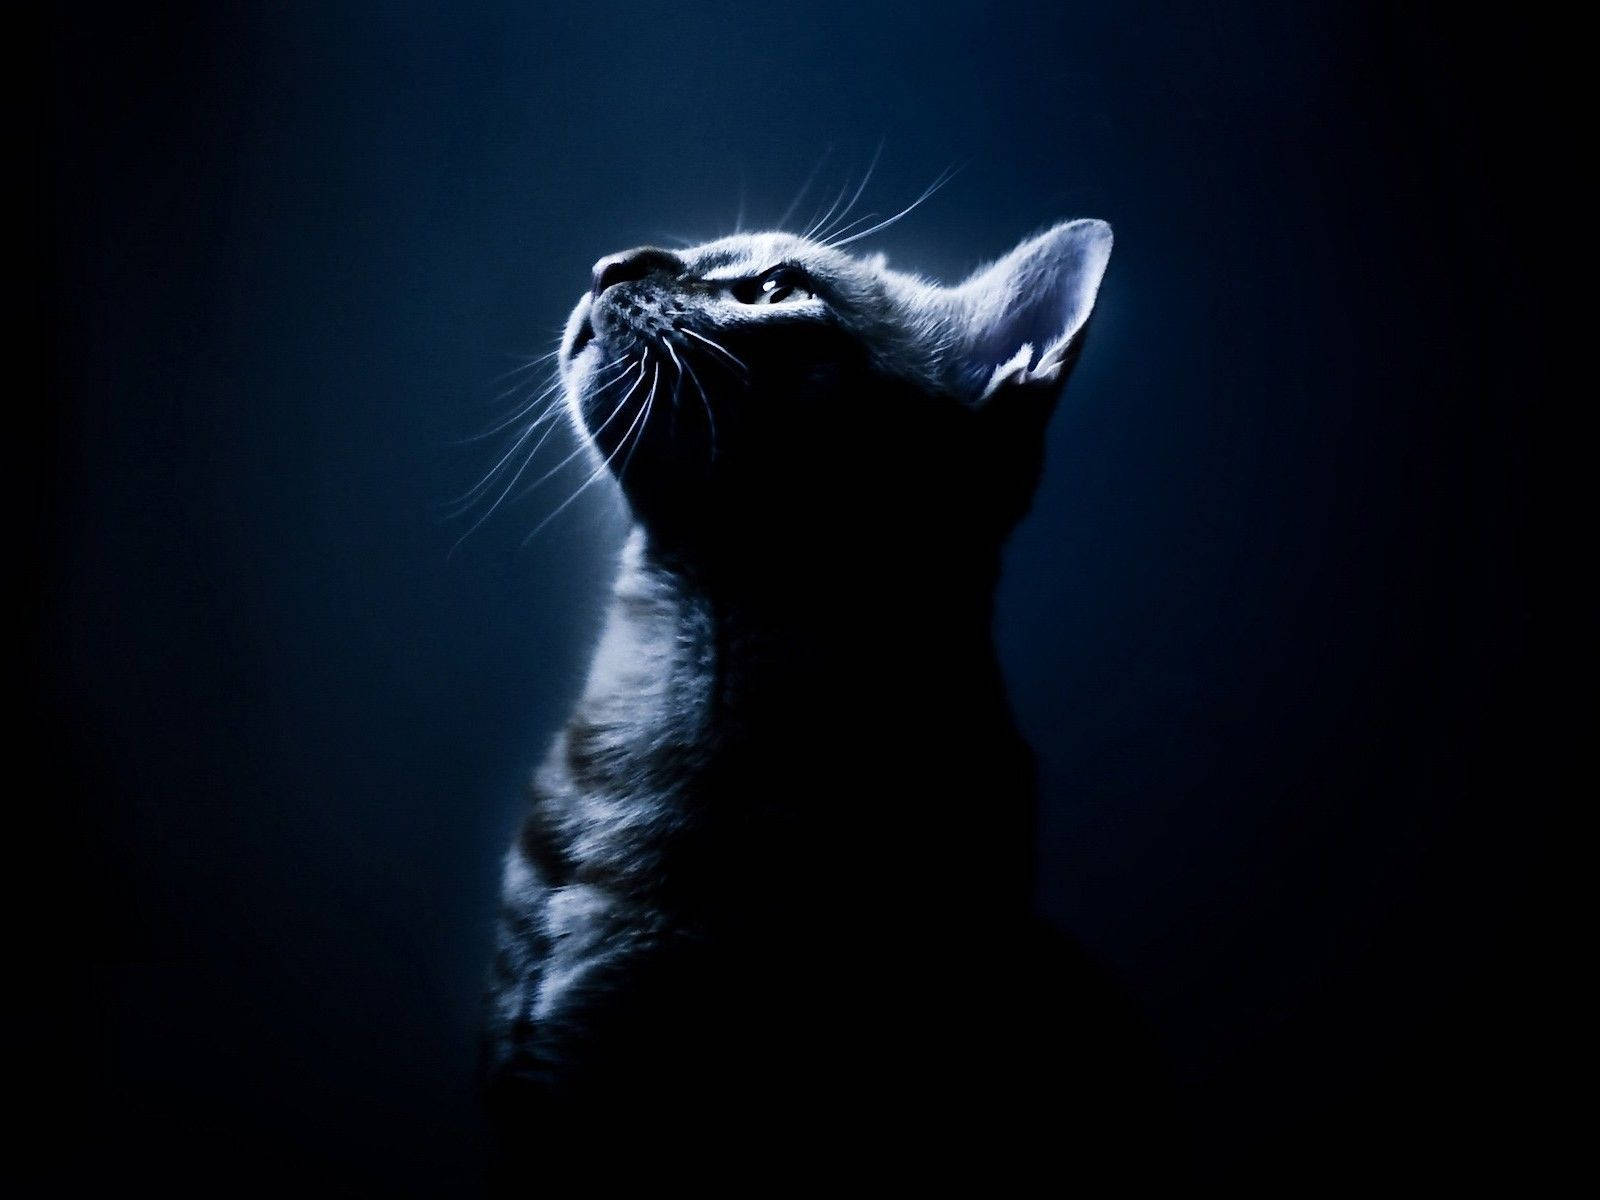 A cat is looking up at something in the dark - Dark blue, navy blue